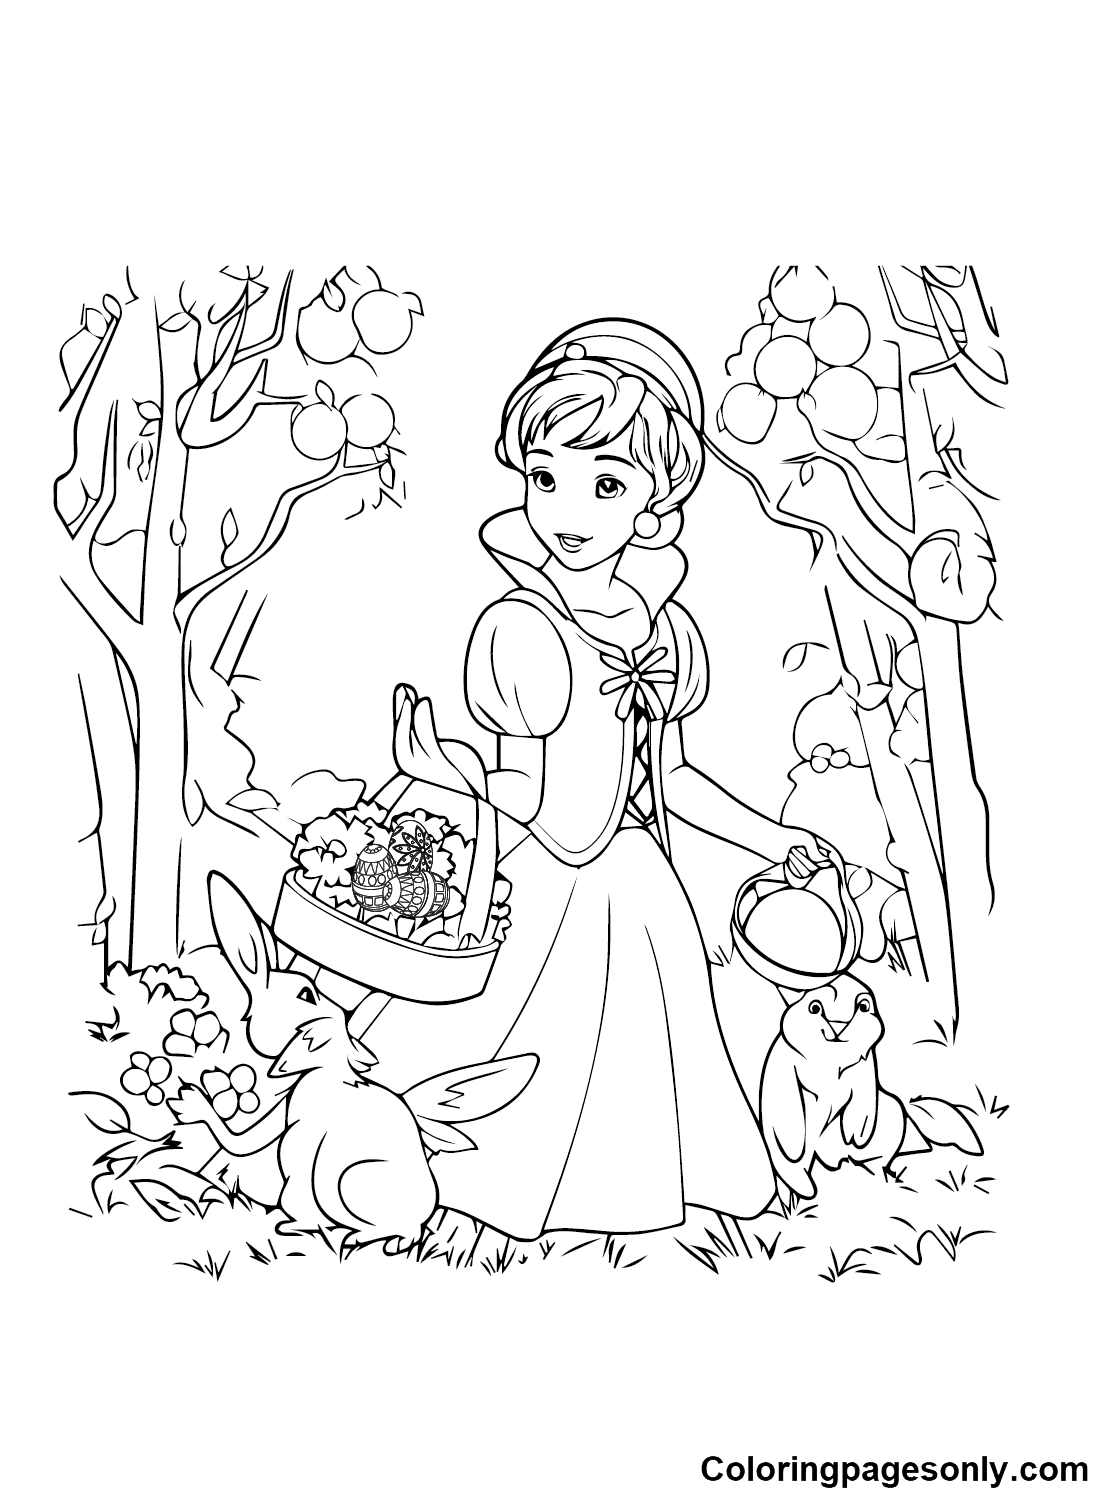 Easter Cartoon Images Coloring Pages